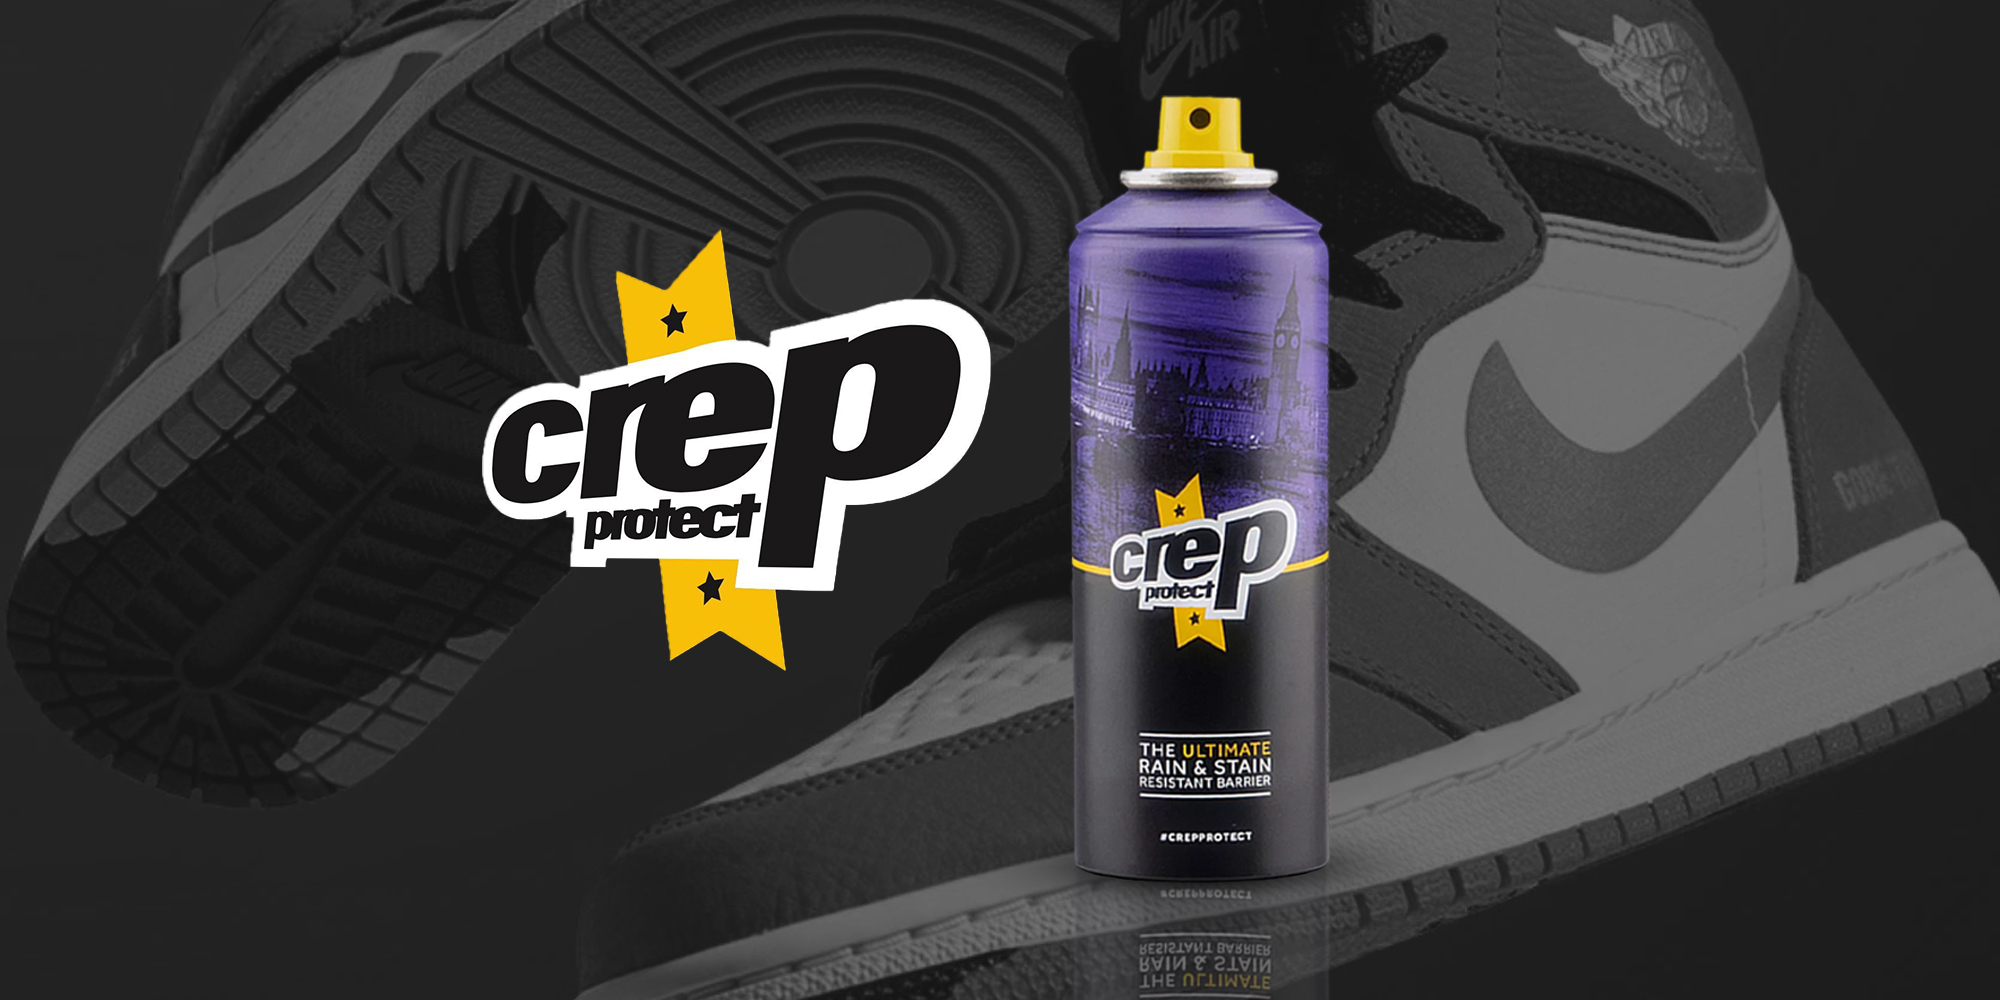 Crep Protect Spray Can